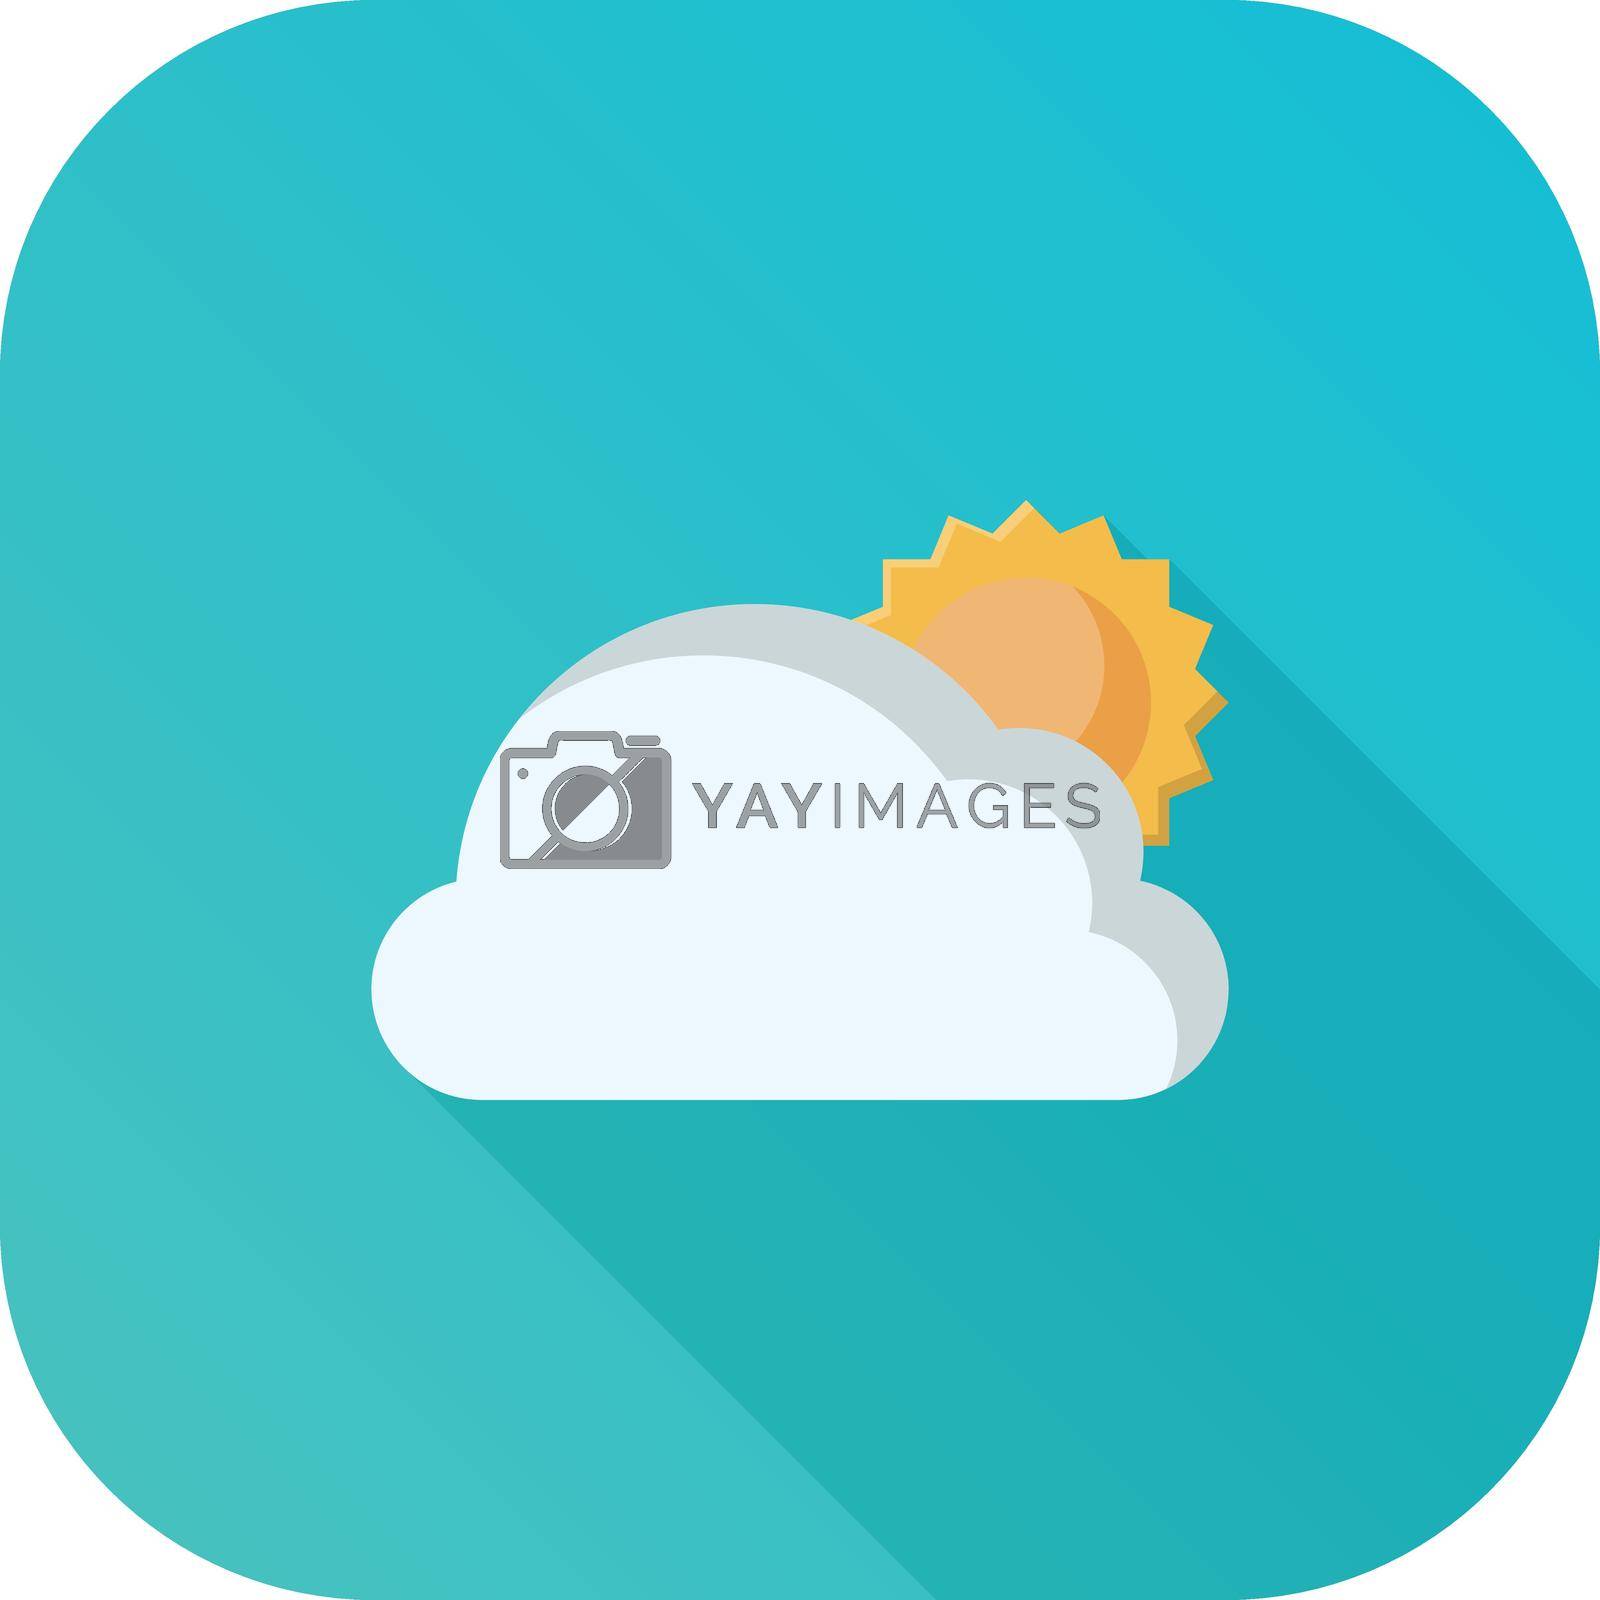 Royalty free image of weather by FlaticonsDesign